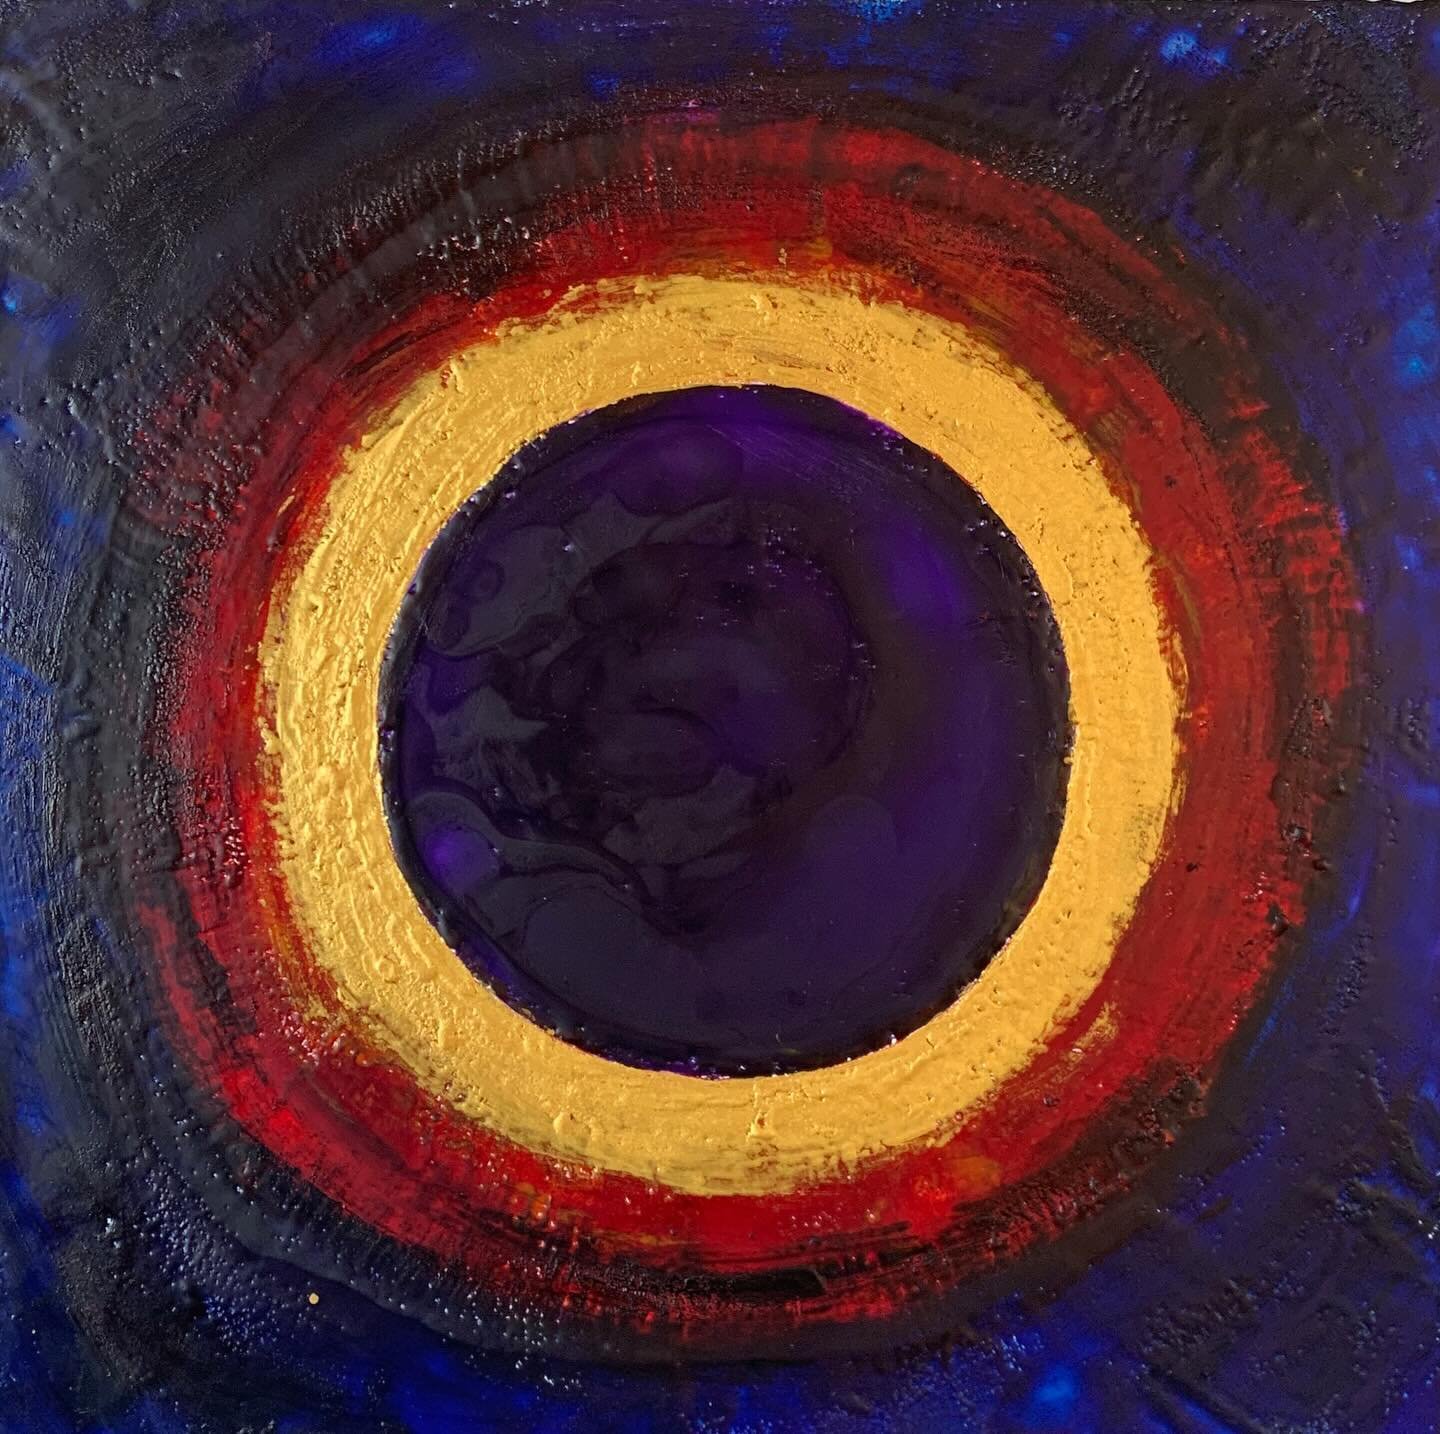 Totality.  I didn&rsquo;t make it to northern Maine for 100% totality, but we were at 96% here. And what&rsquo;s an artist&rsquo;s imagination for, anyway? This painting is in encaustic, with shimmery gold highlights in @rfpaints ancient gold. 

.
.
